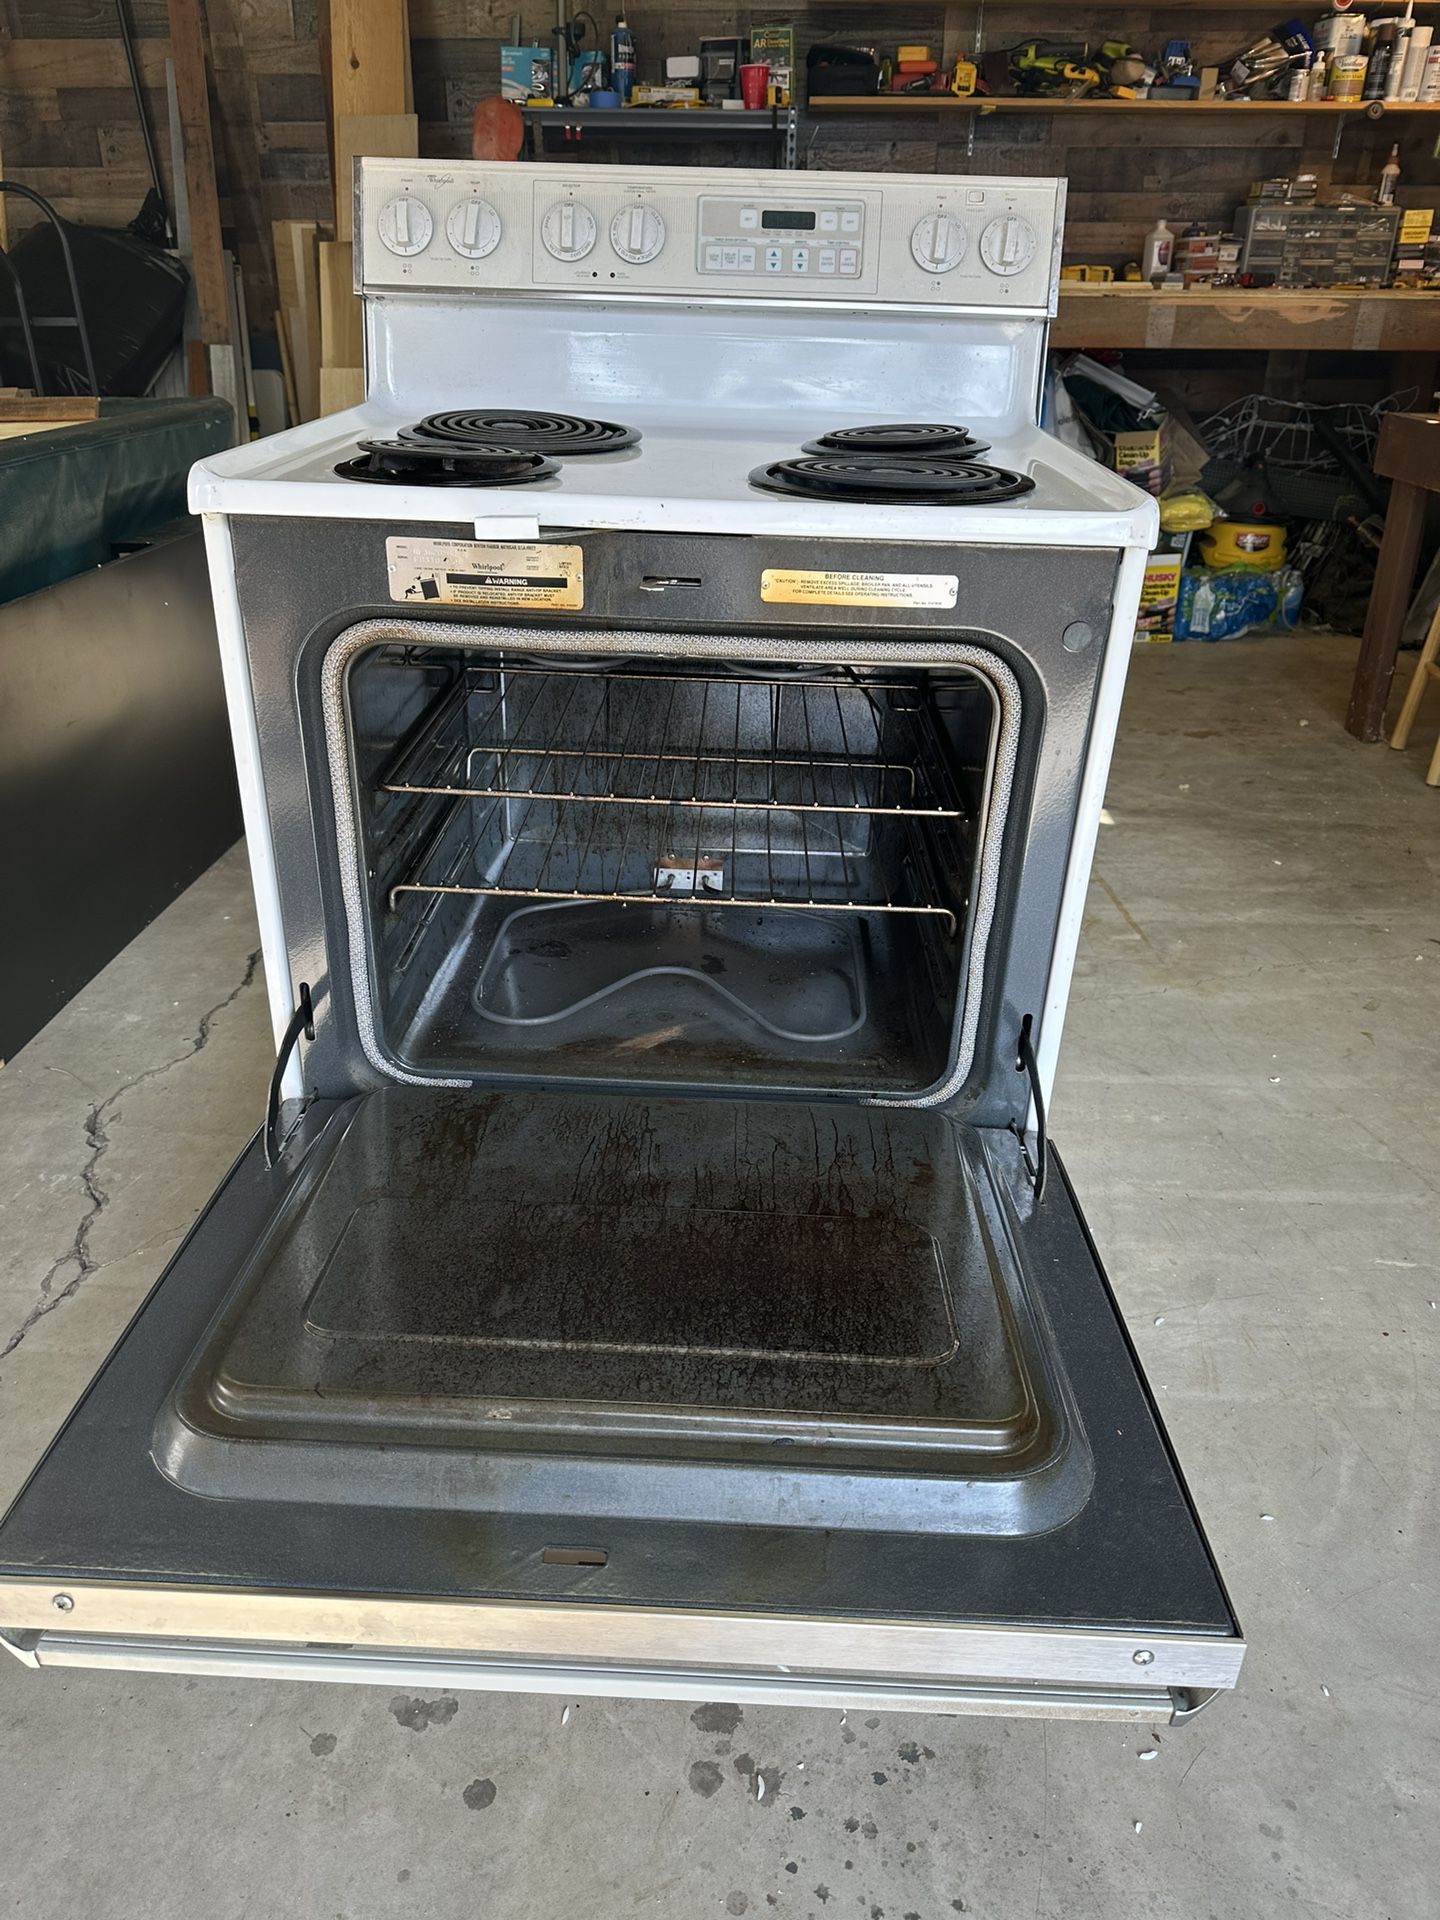 Whirlpool Stove And Microwave